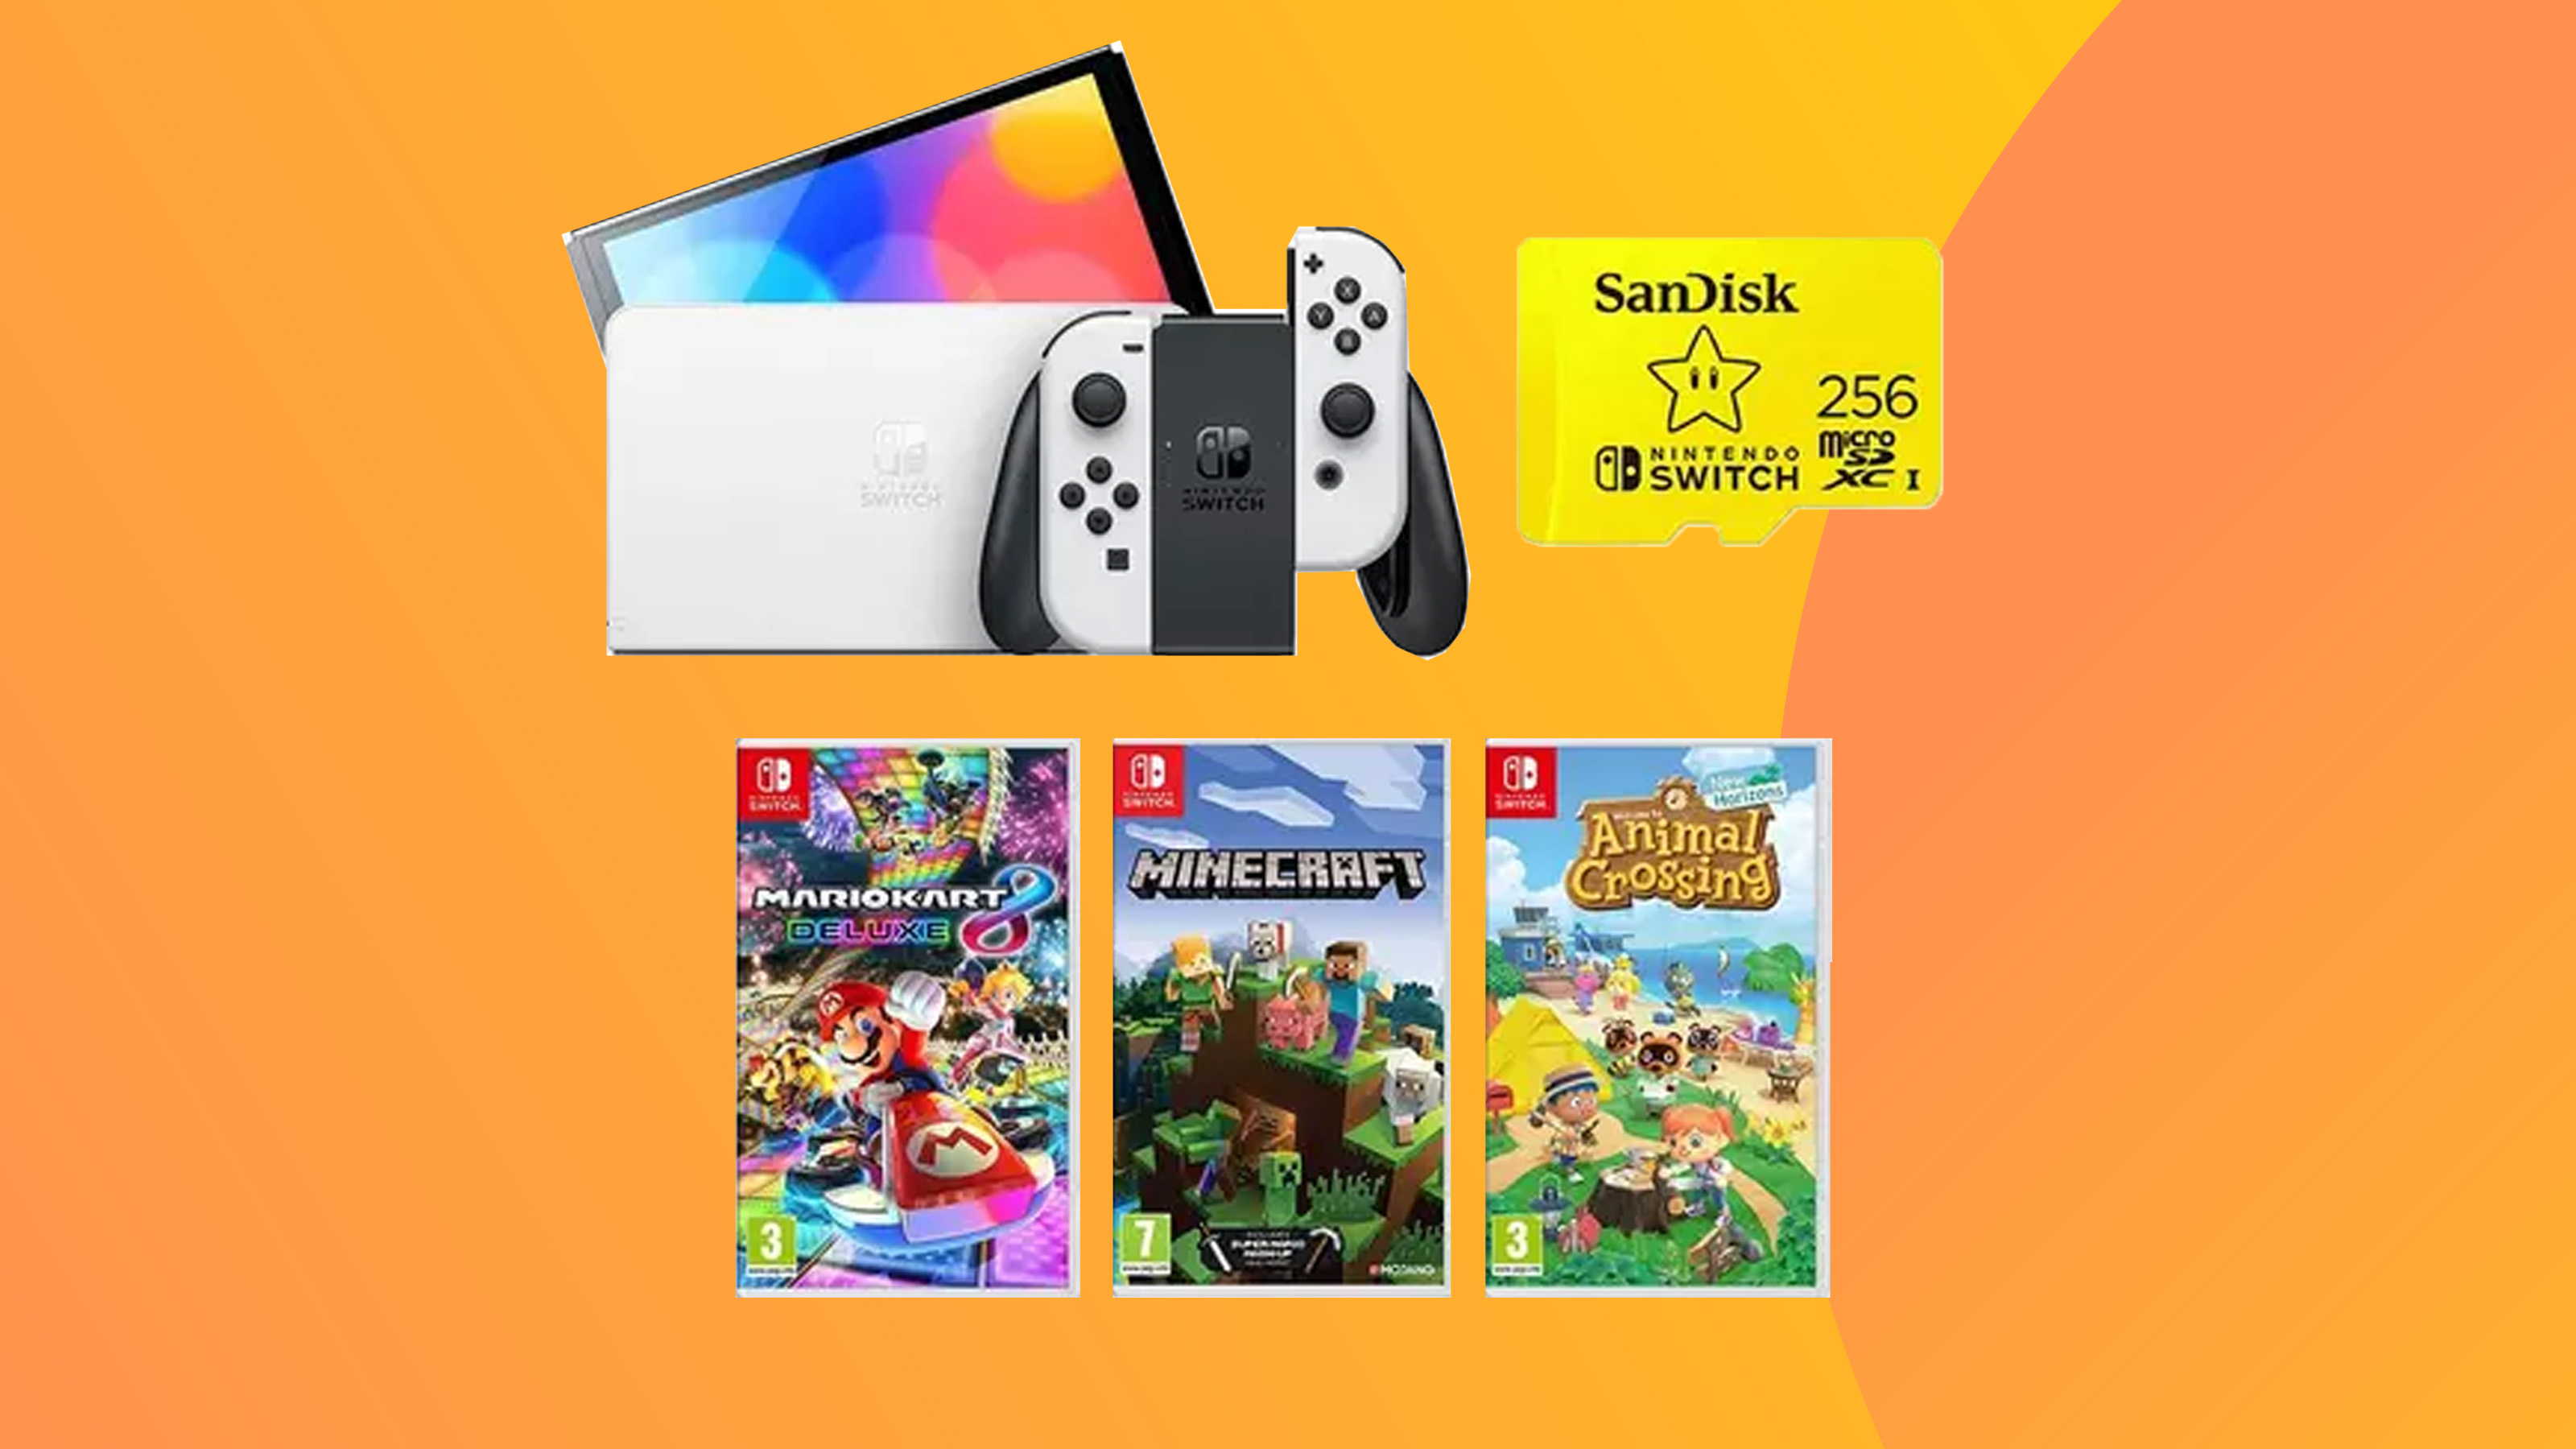 A product shot of the Nintendo Switch OLED bundle against a colored background